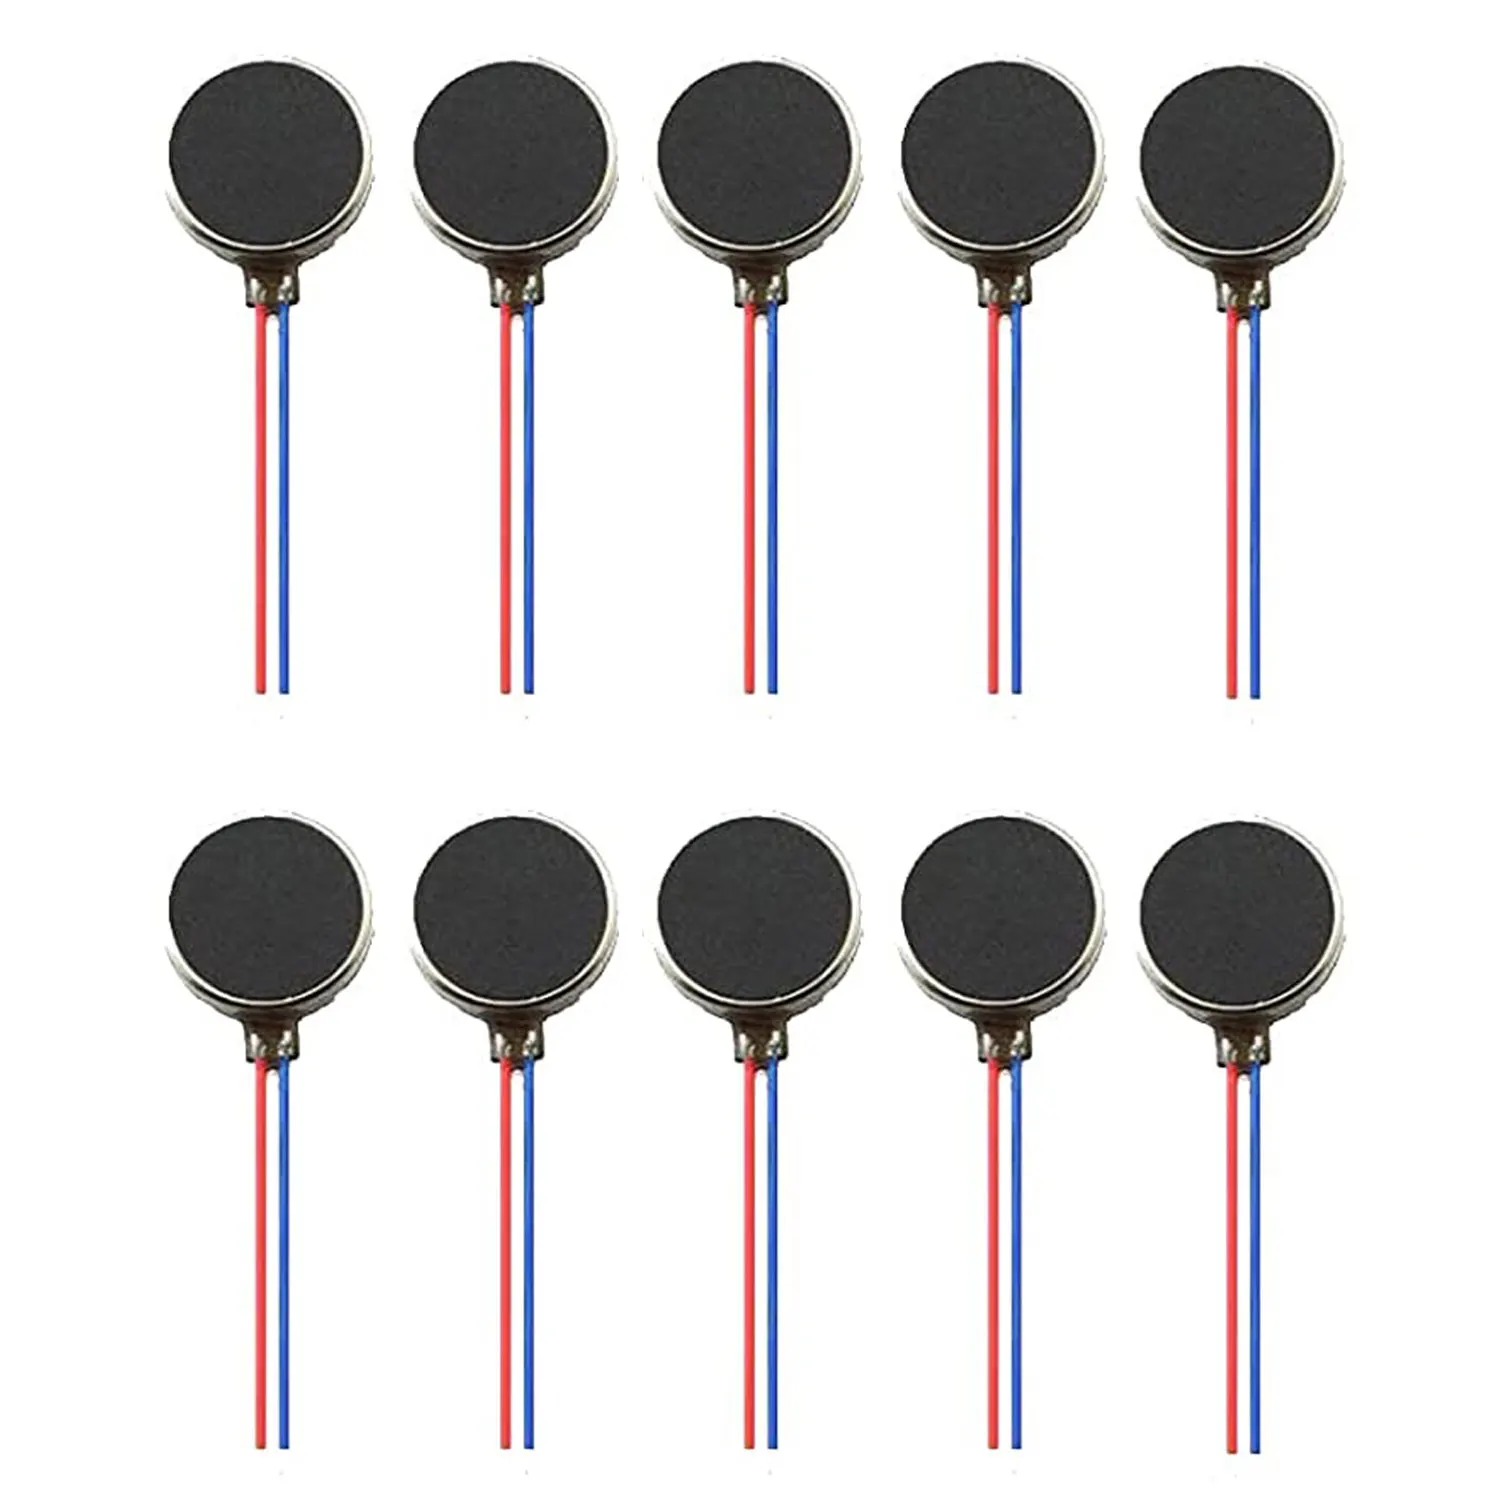 

10PCS 10mmx3mm Mini Vibration Motors DC 3V 12000rpm Flat Coin Button-Type Micro DC Vibrating Motor for Mobile Cell Phone Pager